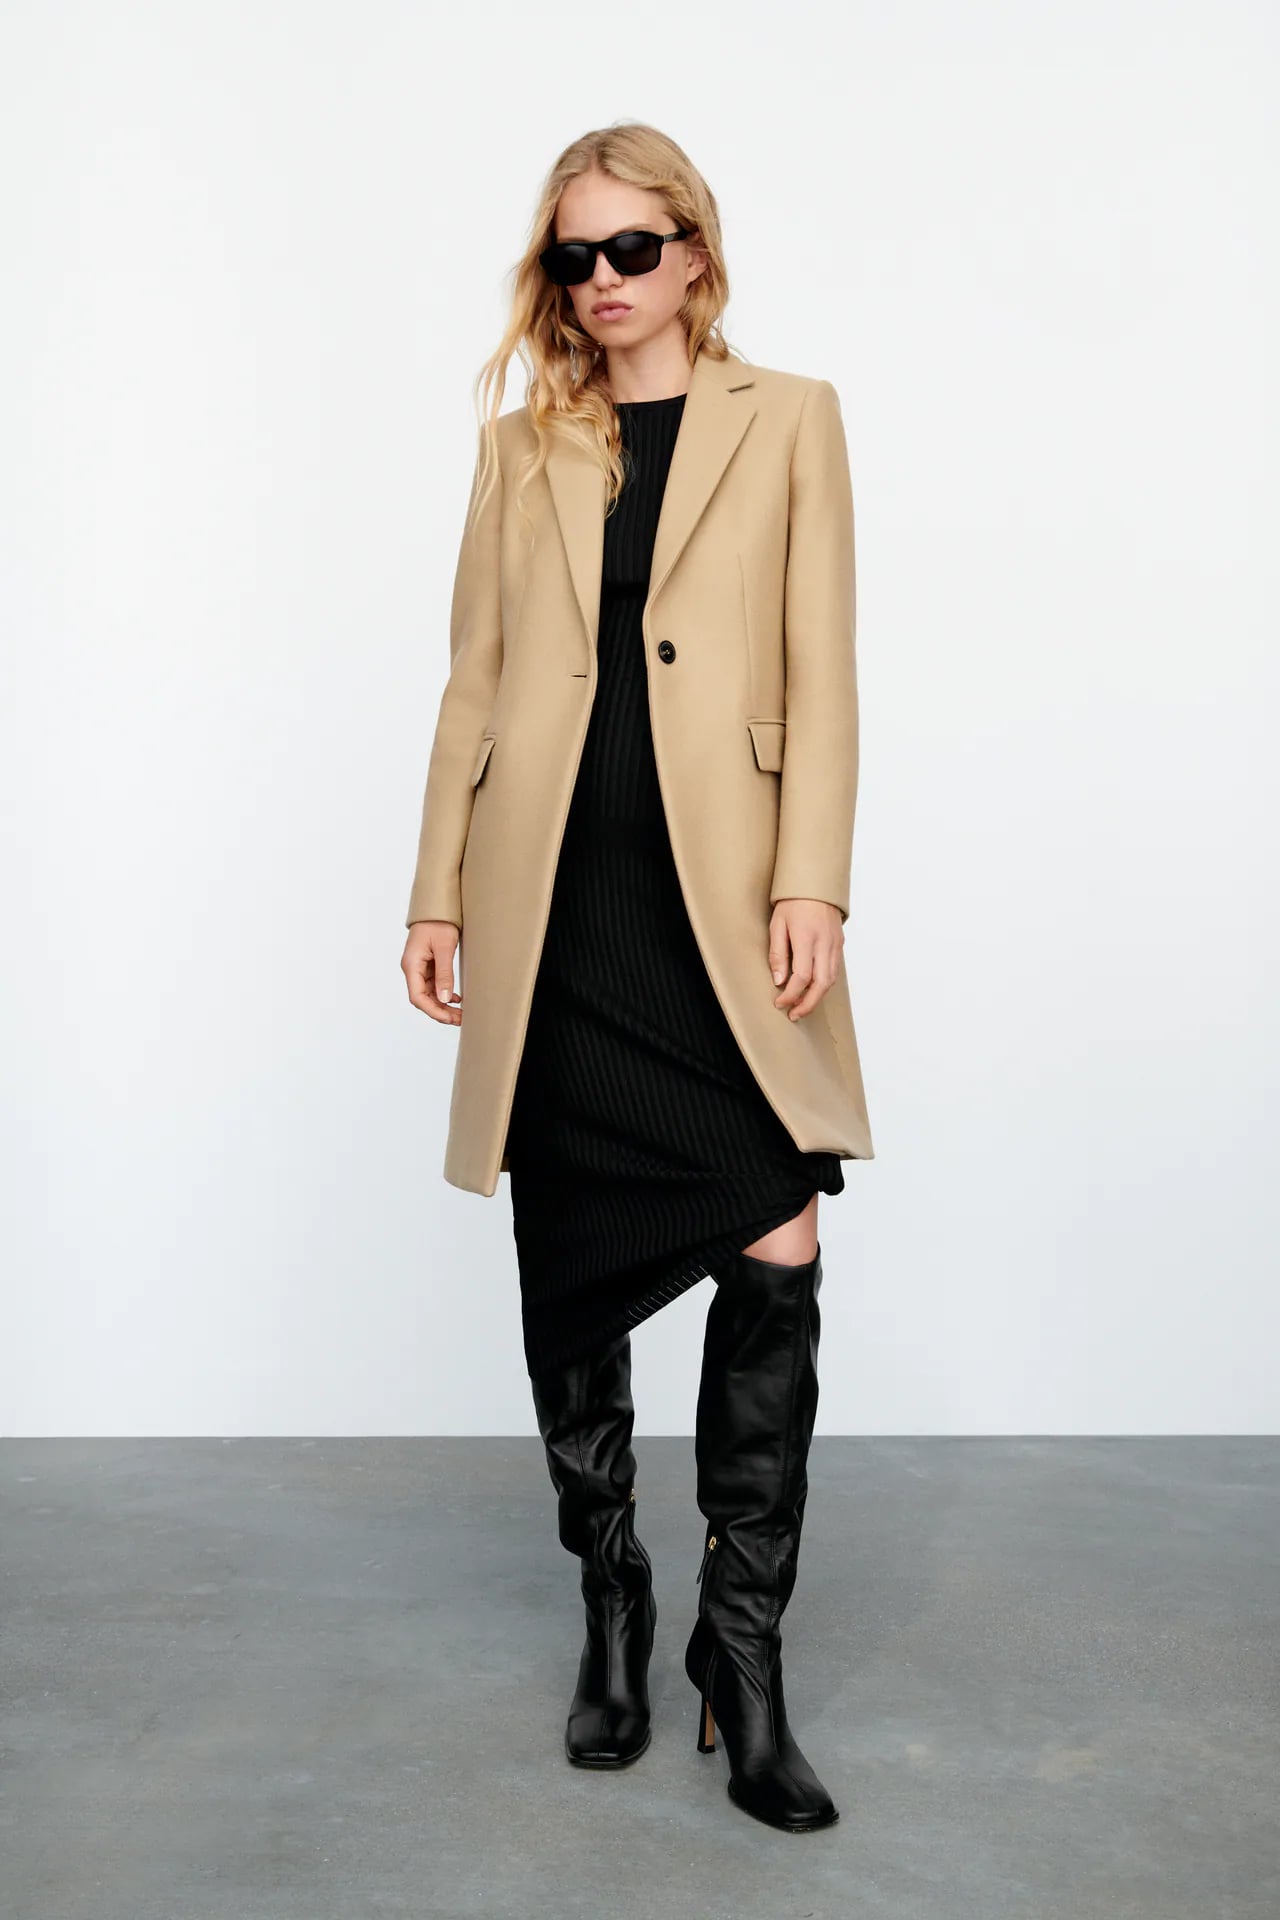 An Elegant, Simple Coat: Zara Menswear Style Wool Coat | 12 Zara Coats  Worth Wrapping Yourself in Throughout the Chilly Winter Months | POPSUGAR  Fashion Photo 13